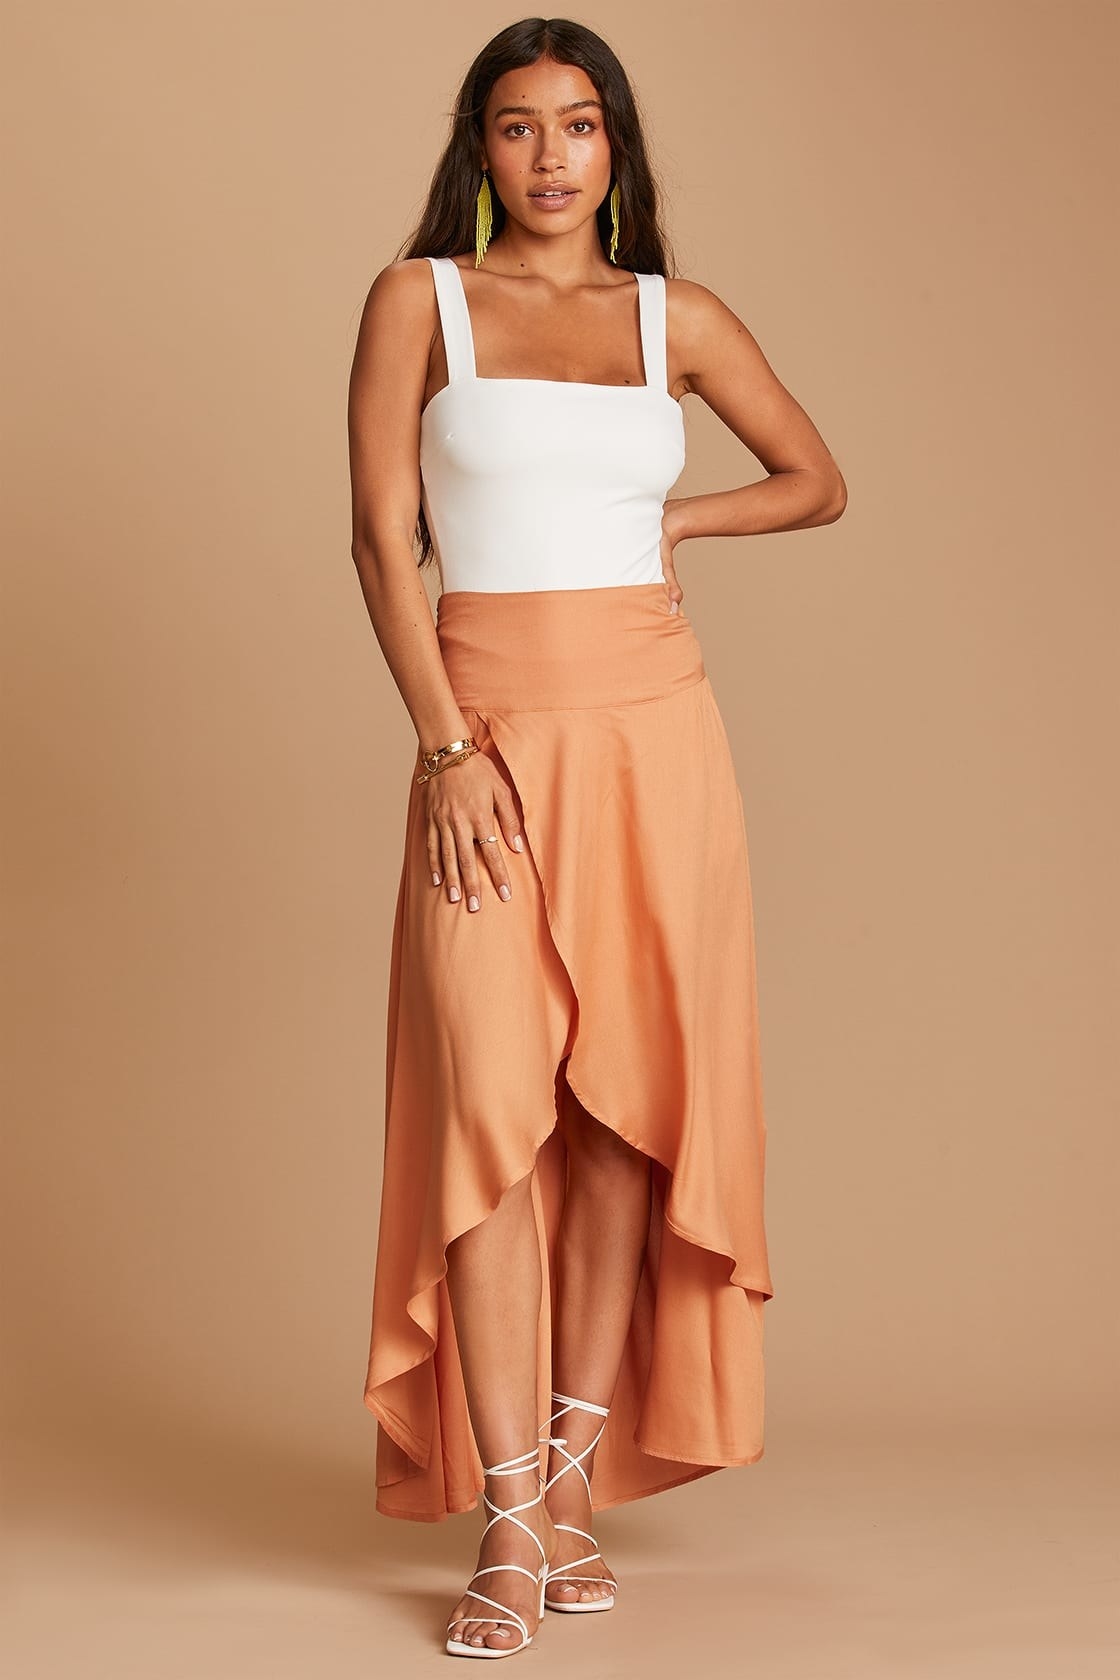 Model is wearing a white top and light orange maxi skirt with white sandals